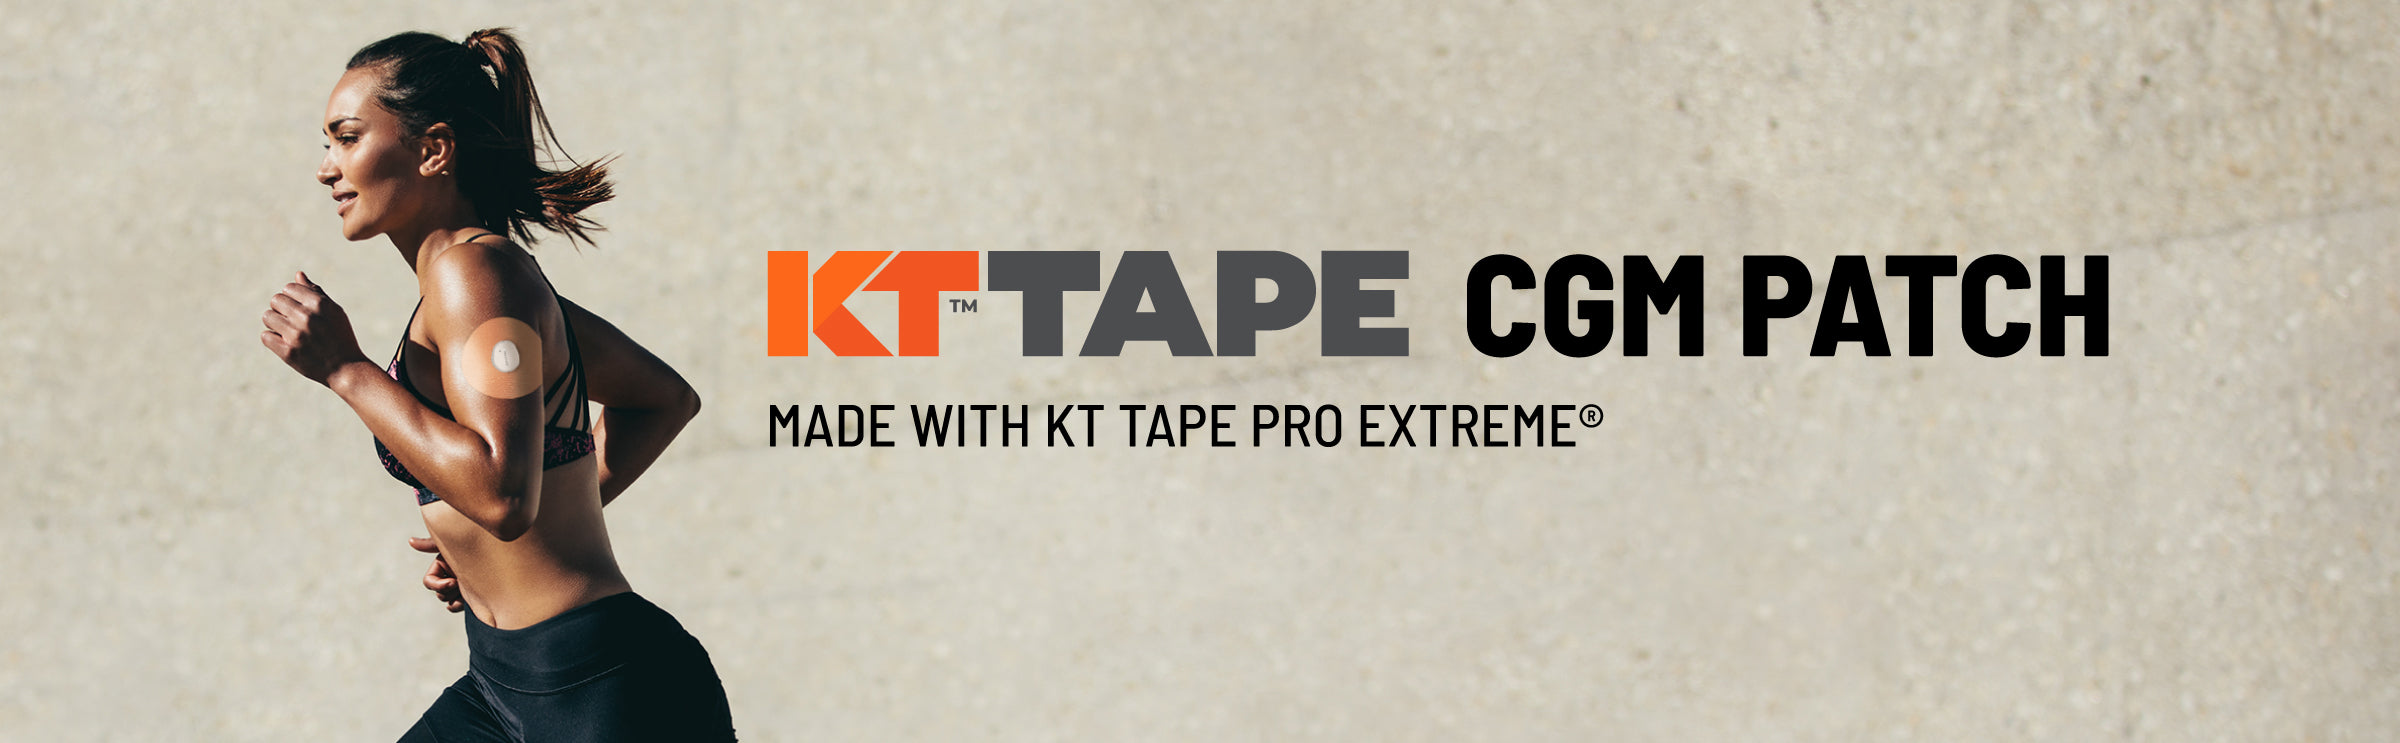 Secure Your CGM Device with Confidence: The KT Tape CGM Patch